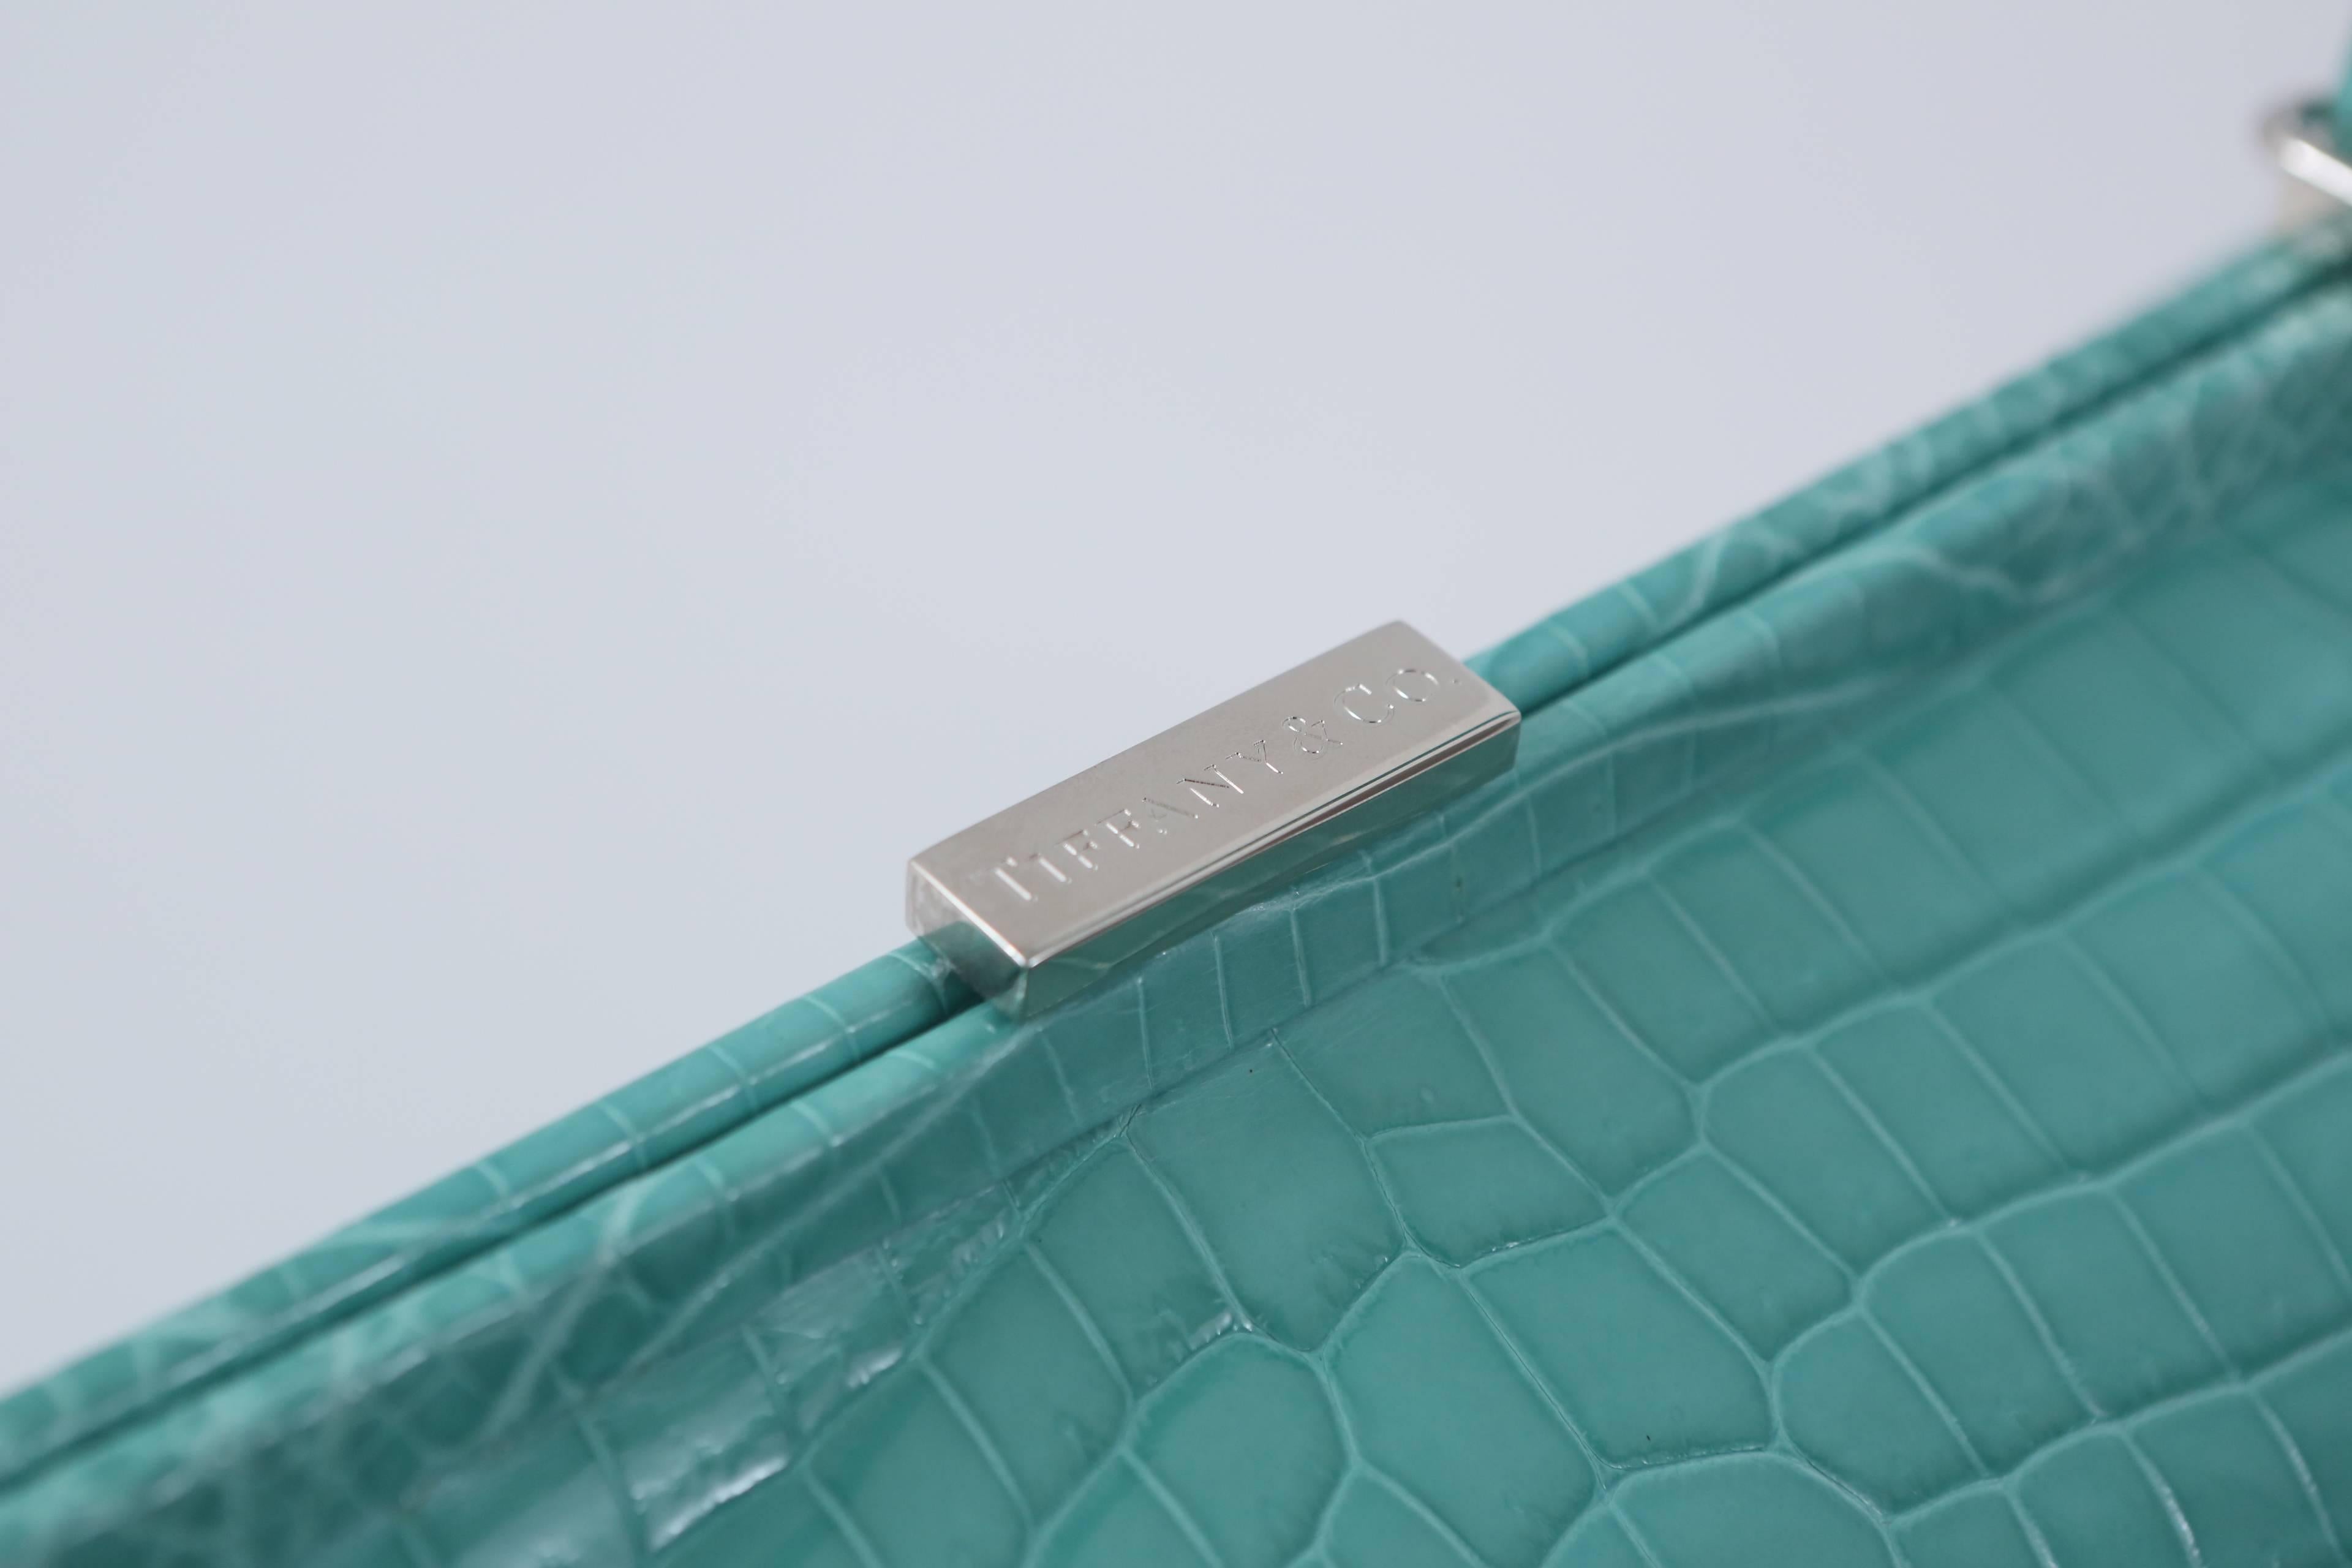 Tiffany & Co. "Laurelton" crocodile handbag in Tiffany Blue with single top handle, silver hardware and front pocket.  

Comes with original box & shopping bag.
